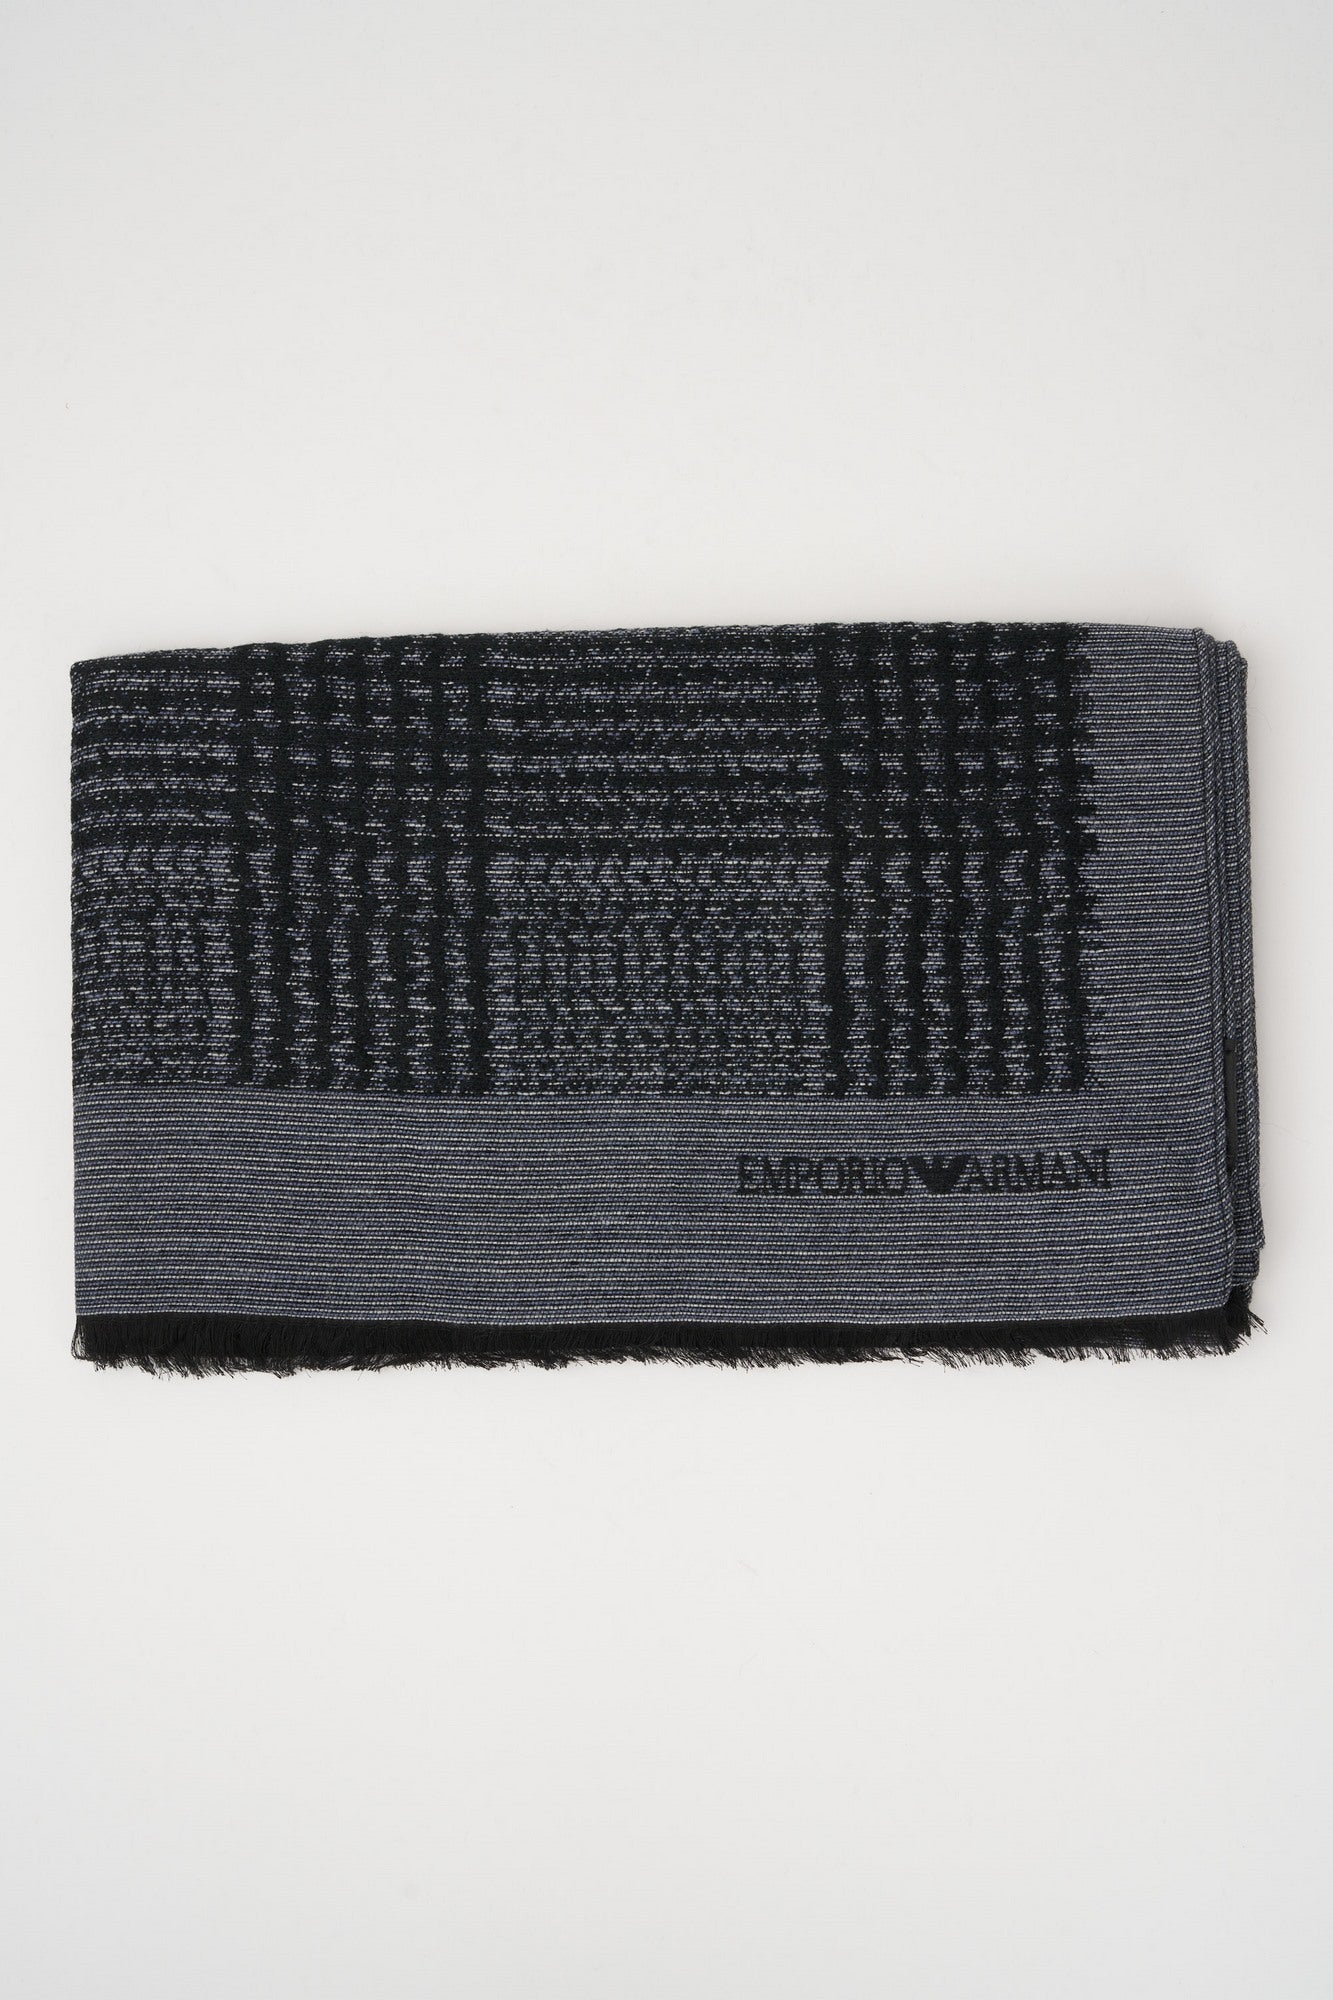 Emporio Armani Modal/Mohair Blend Scarf with Jacquard Pattern Black-2